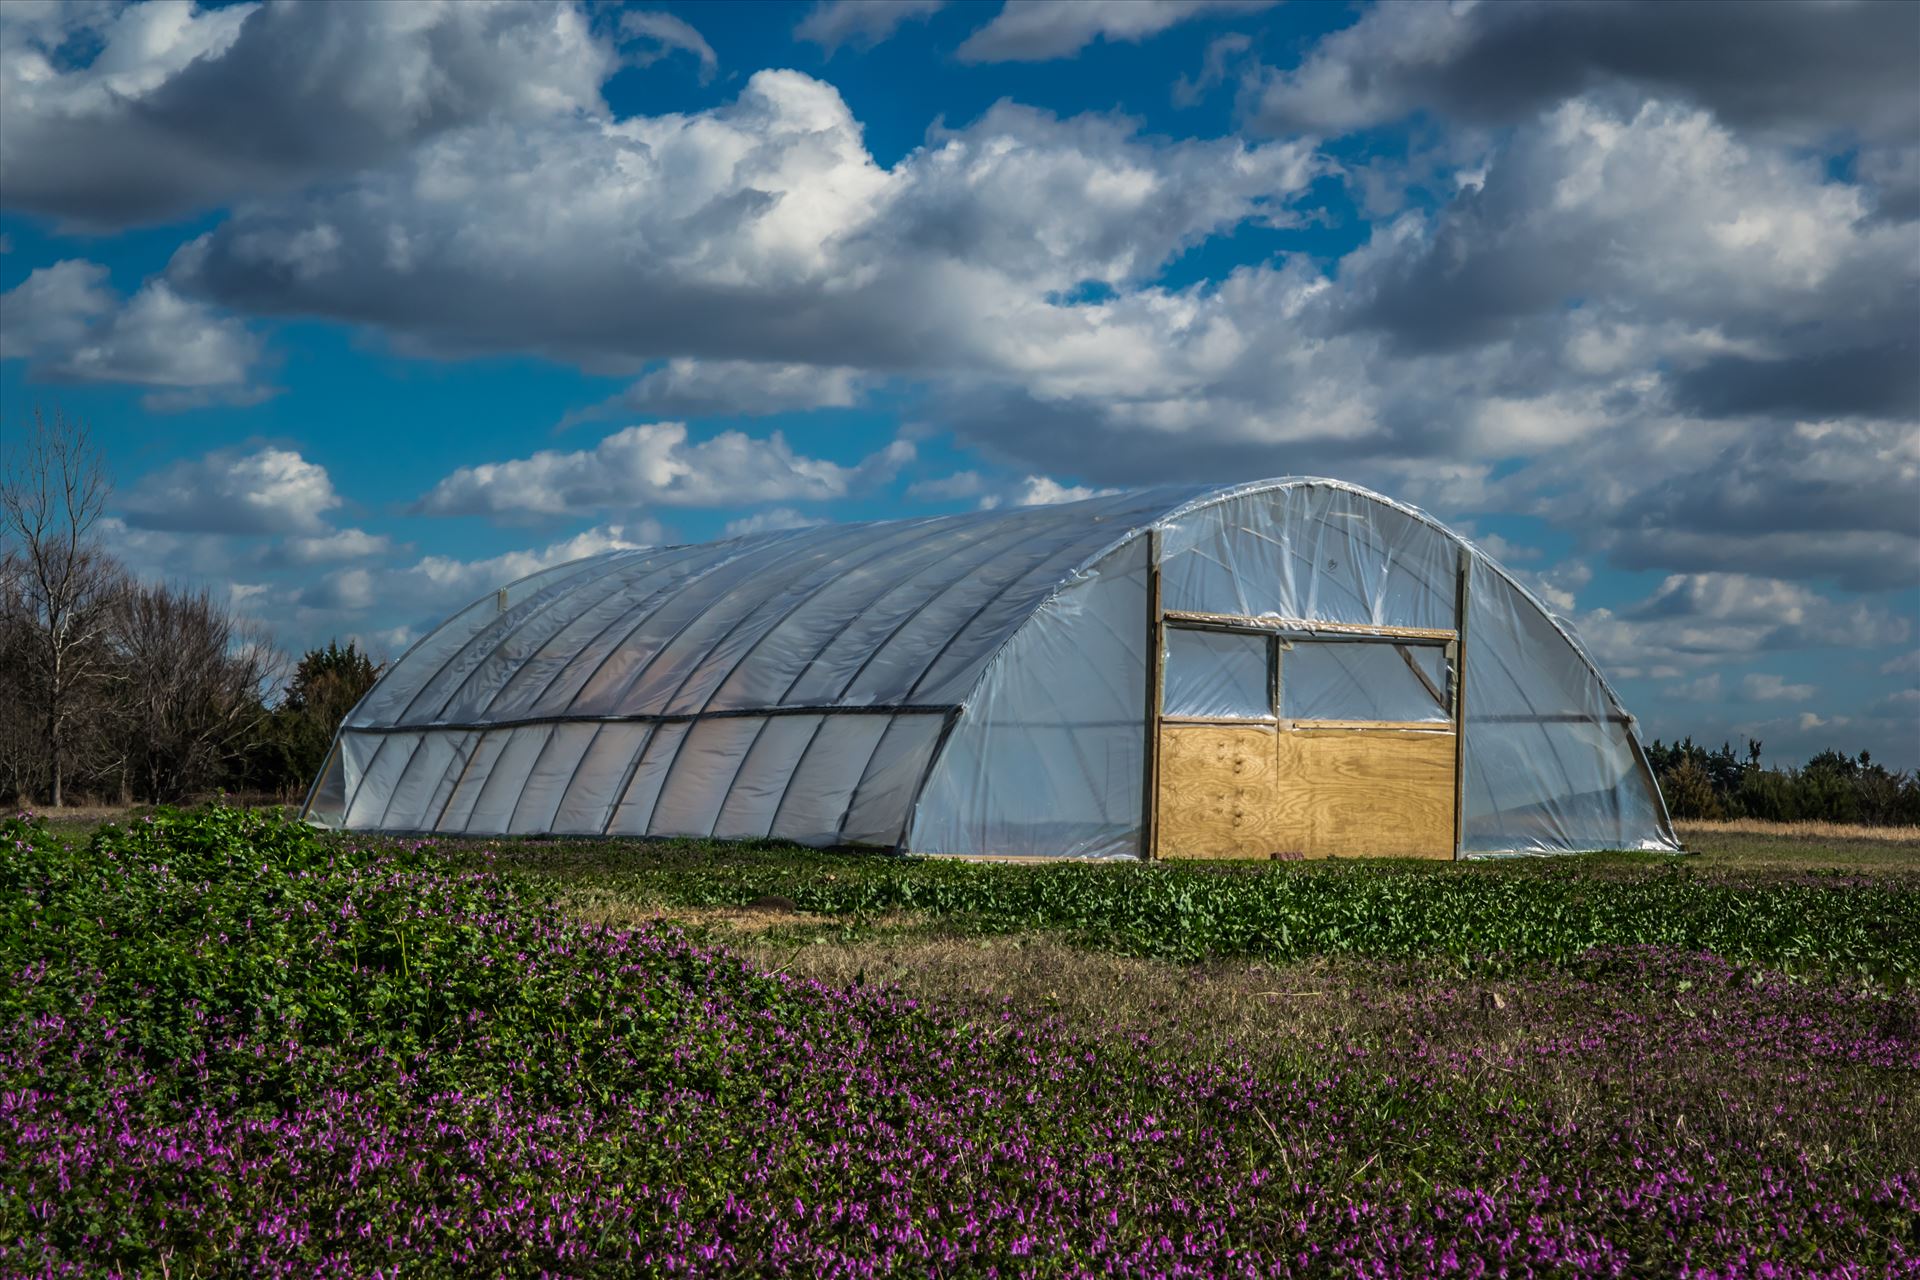 Greenhouse  by Unbound Photography